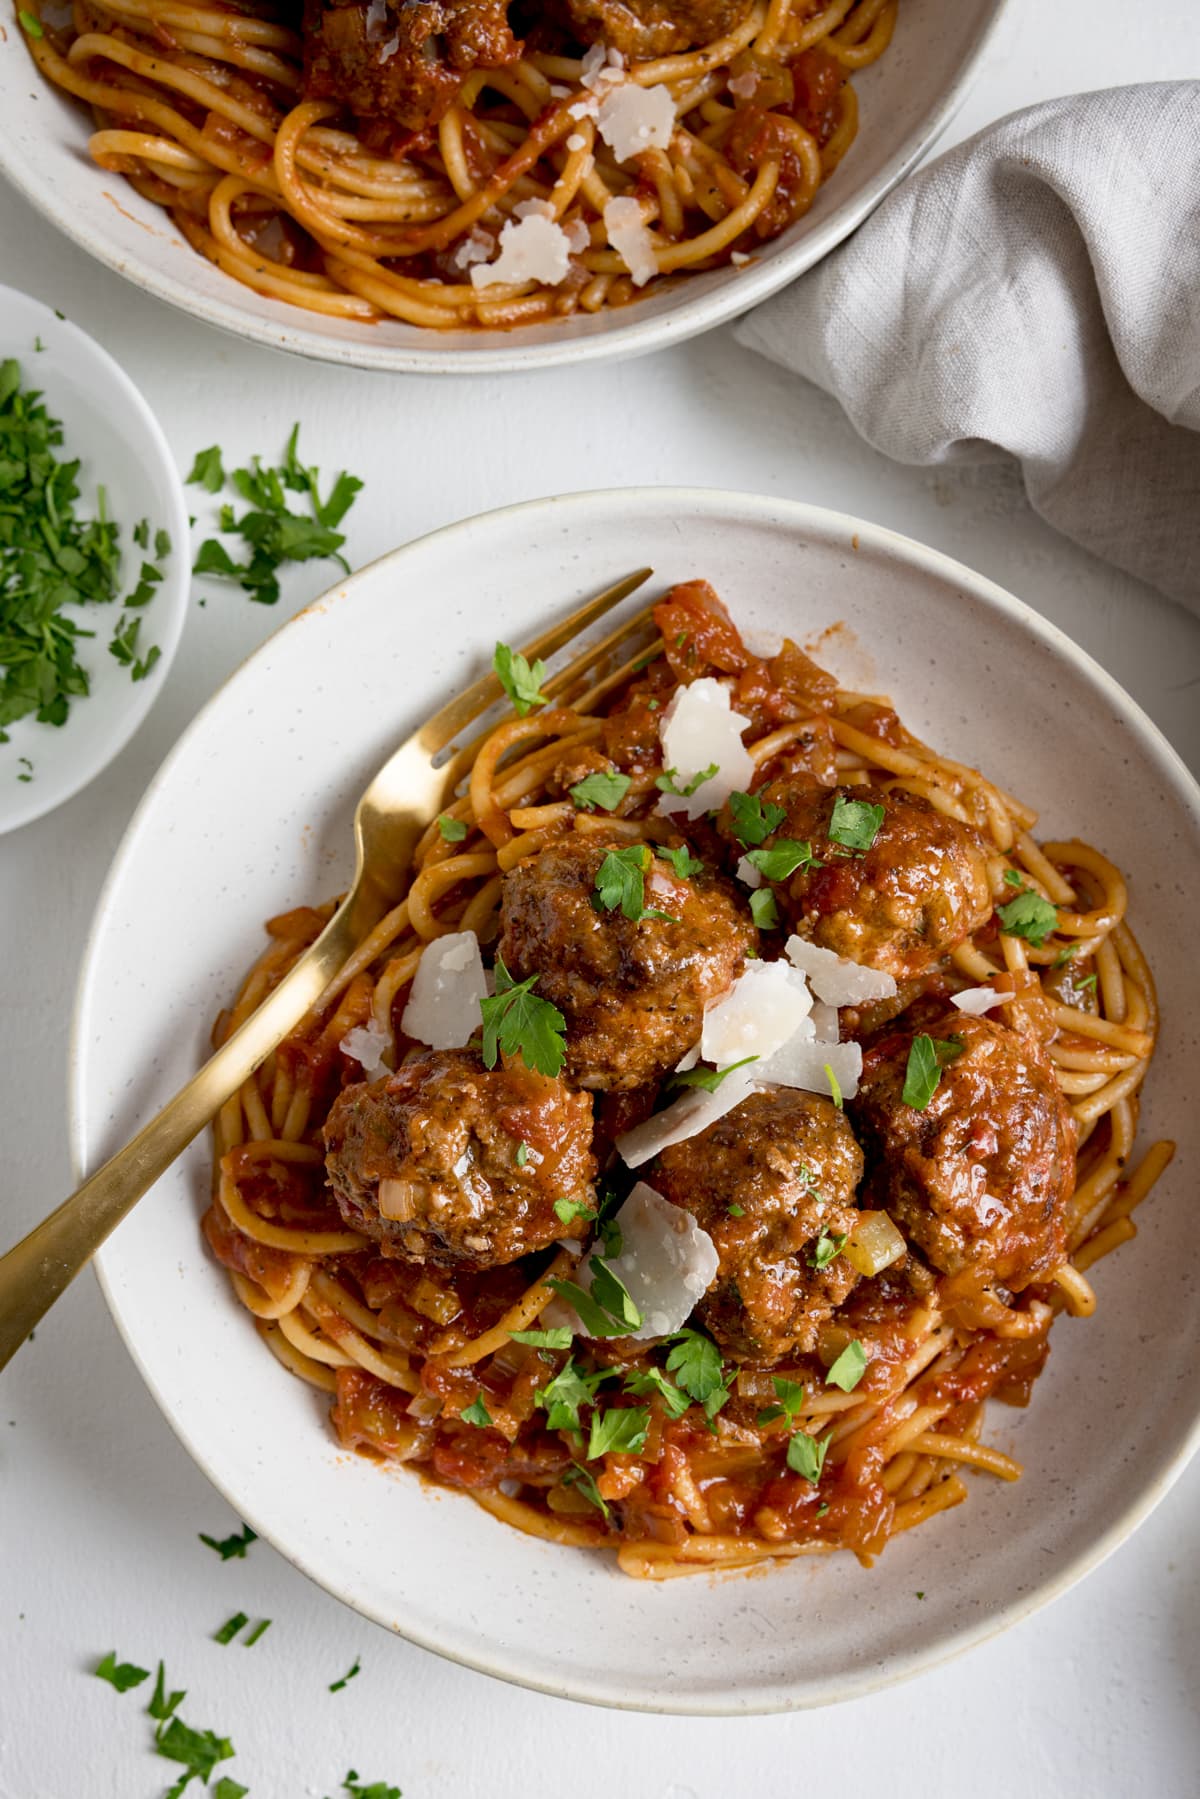 Spaghetti and meatballs in tomato sauce in a white bowl on a white background.  There is a golden fork in the bowl.  There's another bowl of spaghetti and meatballs right at the top of the frame.